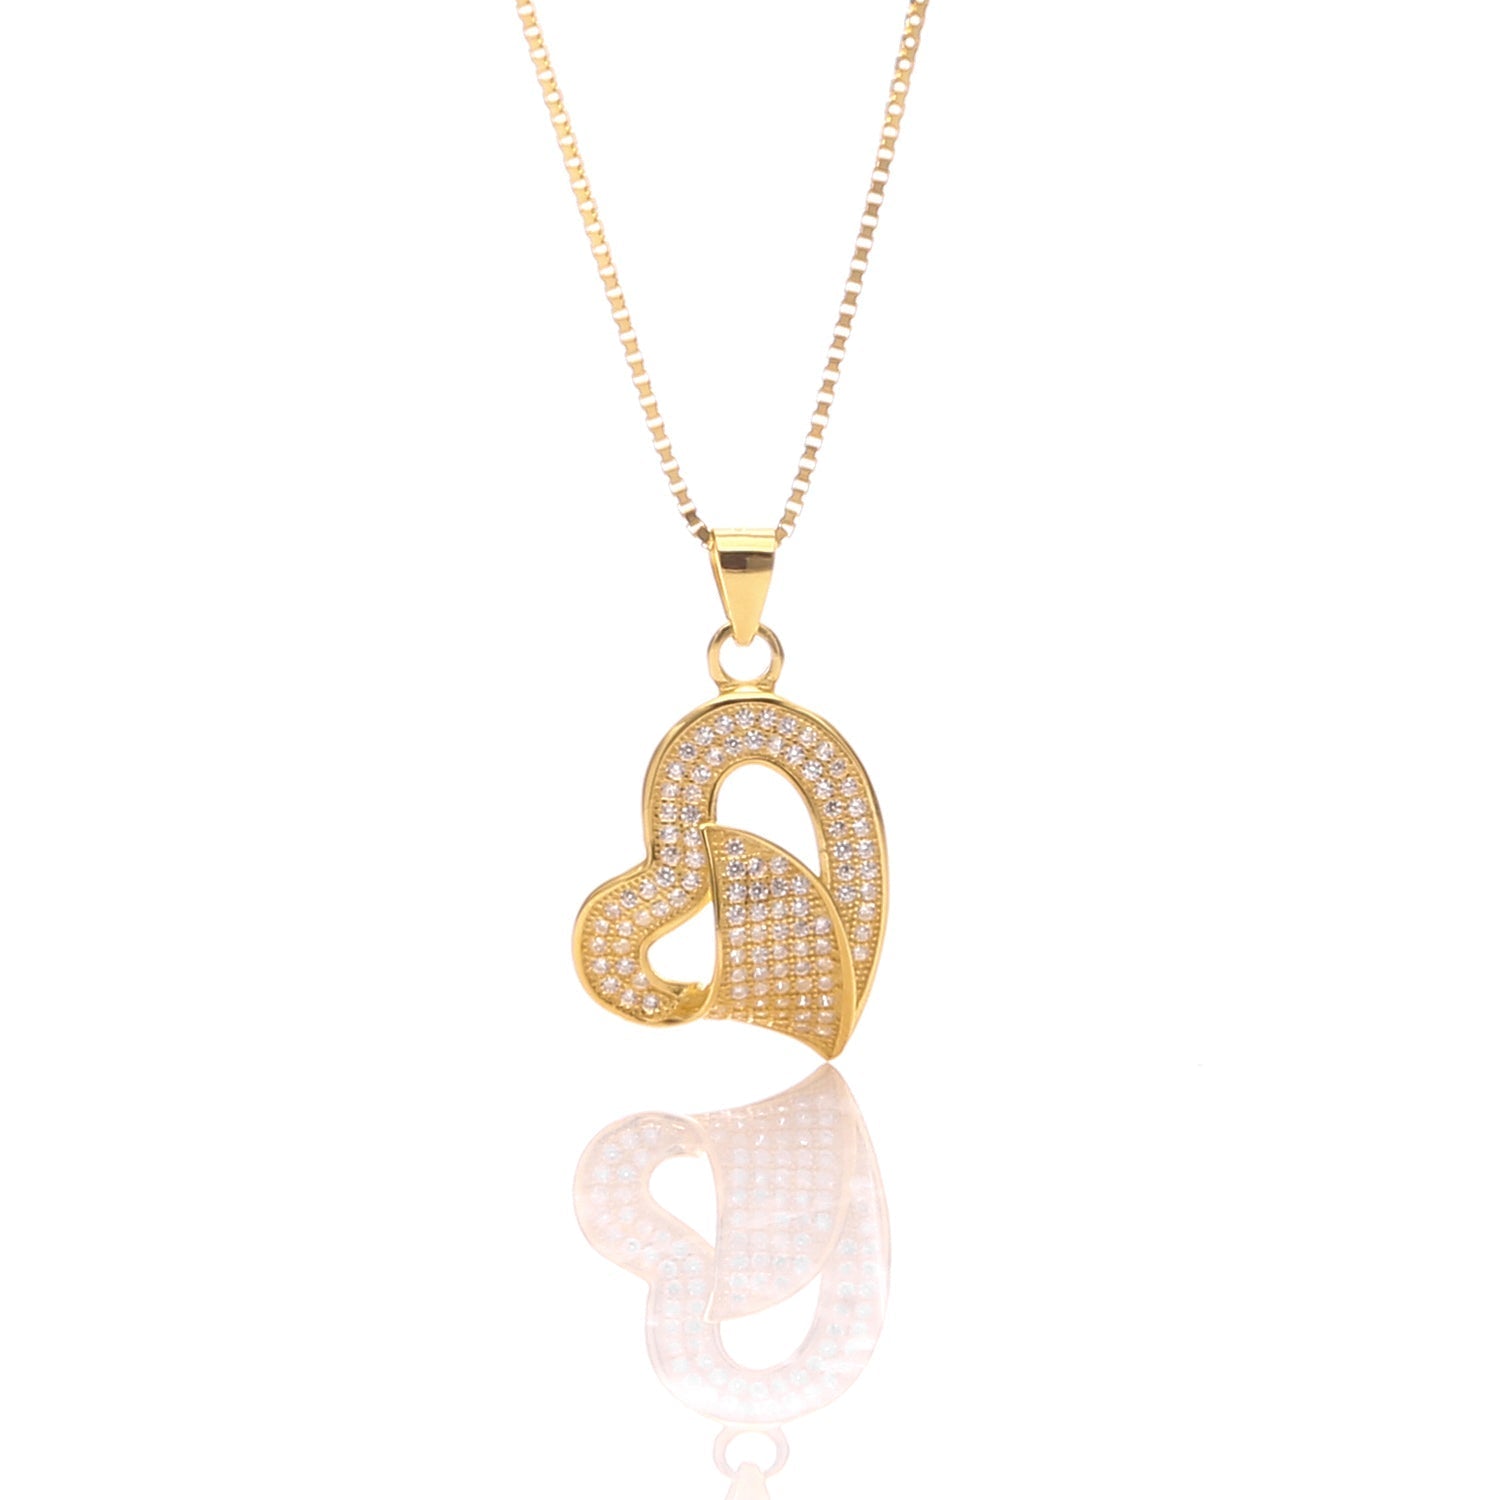 Classic One Sided Bent Heart Shaped Pendant Necklace and Earrings Set - ARJW1014GD ARCADIO